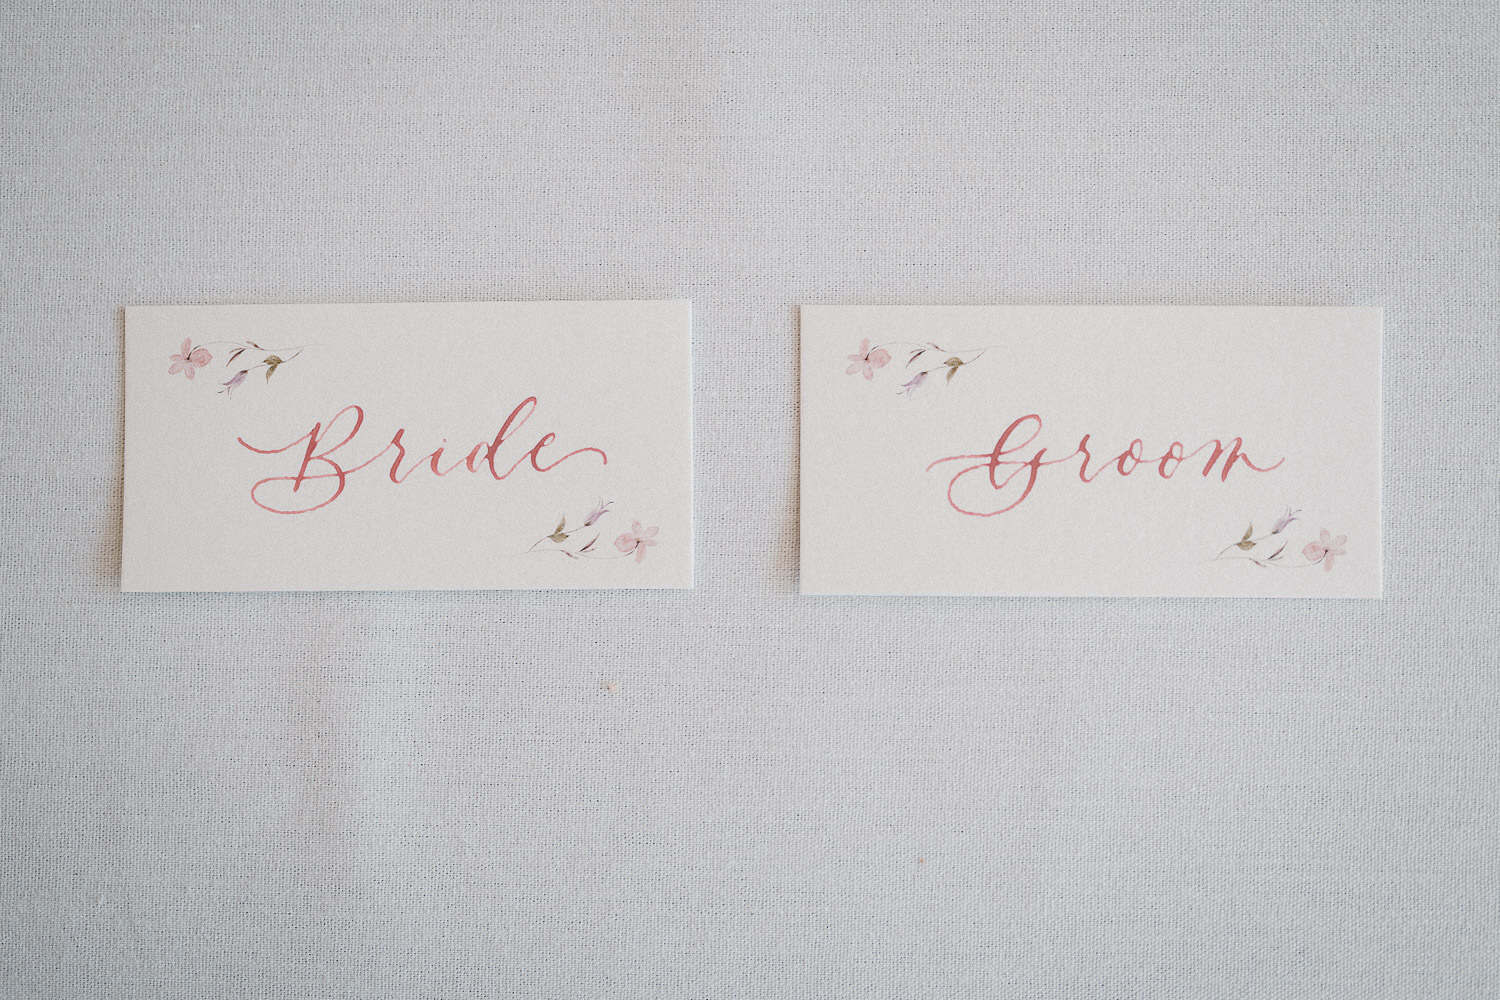 Bride and Groom handwritten place names.